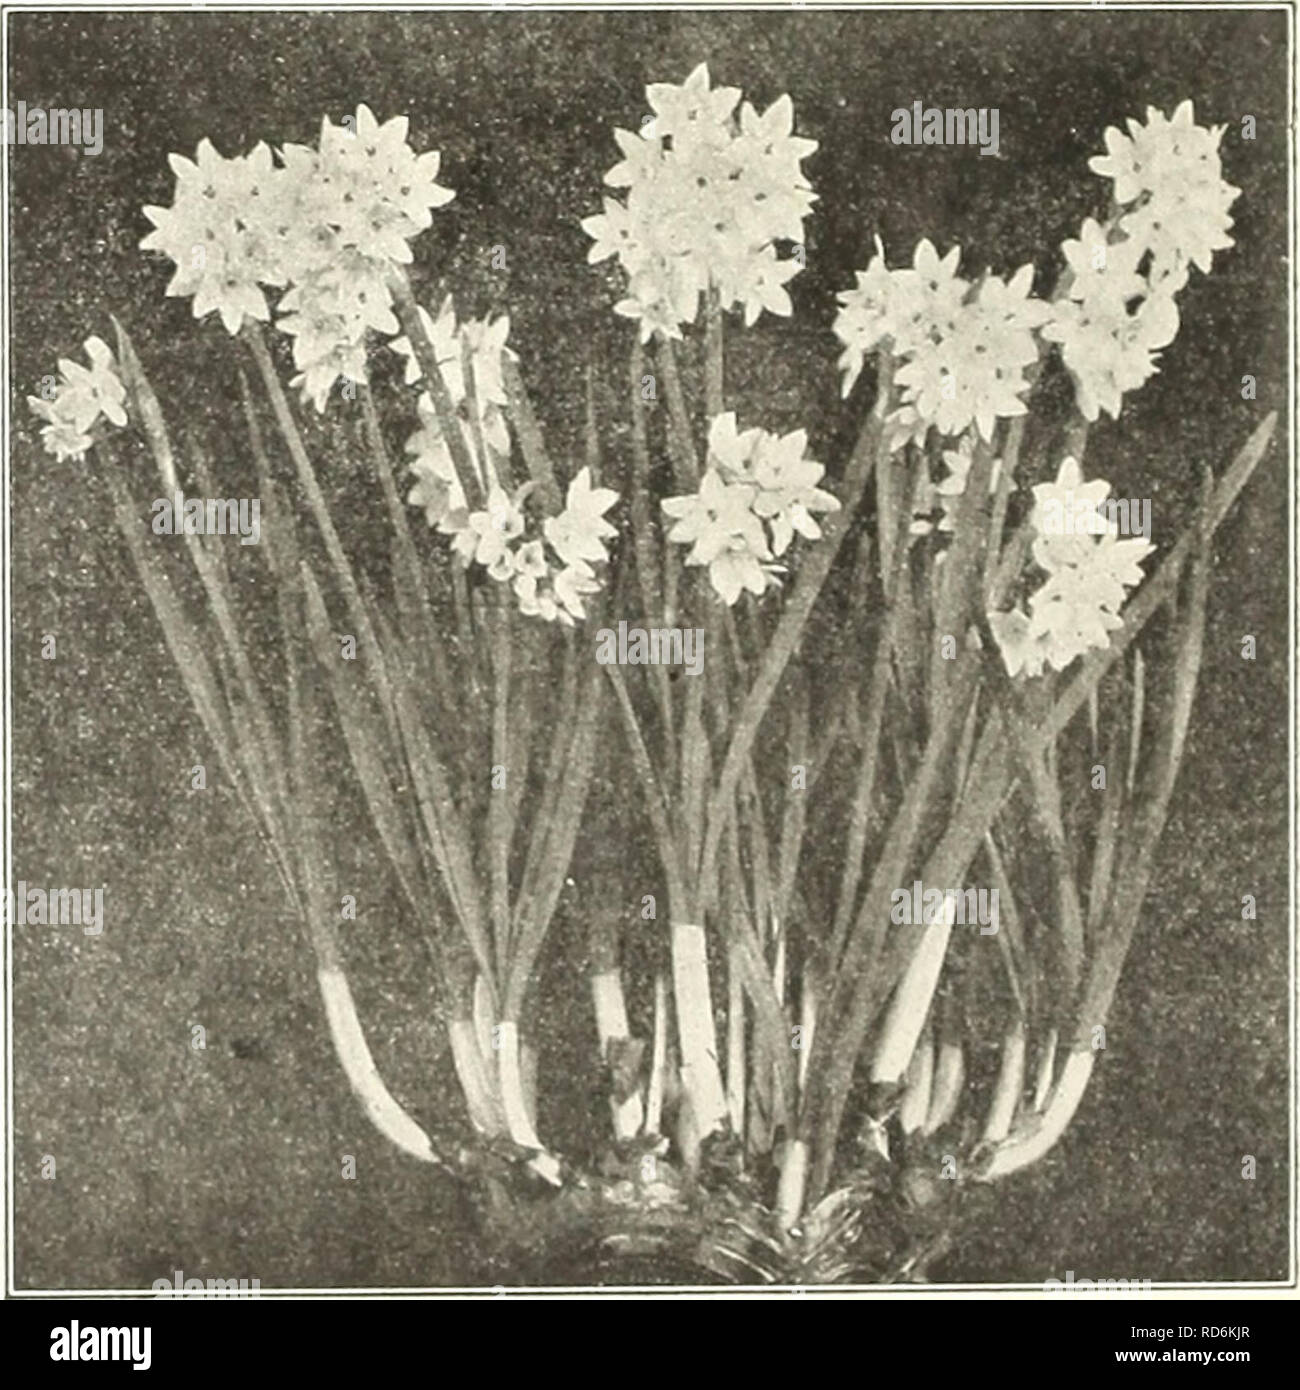 . Currie's bulbs and plants : autumn 1919. Flowers Seeds Catalogs; Bulbs (Plants) Seeds Catalogs; Nurseries (Horticulture) Catalogs; Plants, Ornamental Catalogs. Narcissus Poetaz. Poetaz Narcissus Poeticus Ornatus X Polyanthus. Each white, yellow cup. 3 to 4 ers on a stem. Easily grown Also perfectly hardy and very desirable for outdoor . .'. $ Elvira—Pure large flow in water, therefore planting- Mixed—White and yellow varieties. .11 .08 Doz. 7 $ .75 .0,1 100 $o.00 4.50 Double Narcissus DAFFODILS. While the double Daffodils are not considered as at- tractive as the large flowering single trump Stock Photo